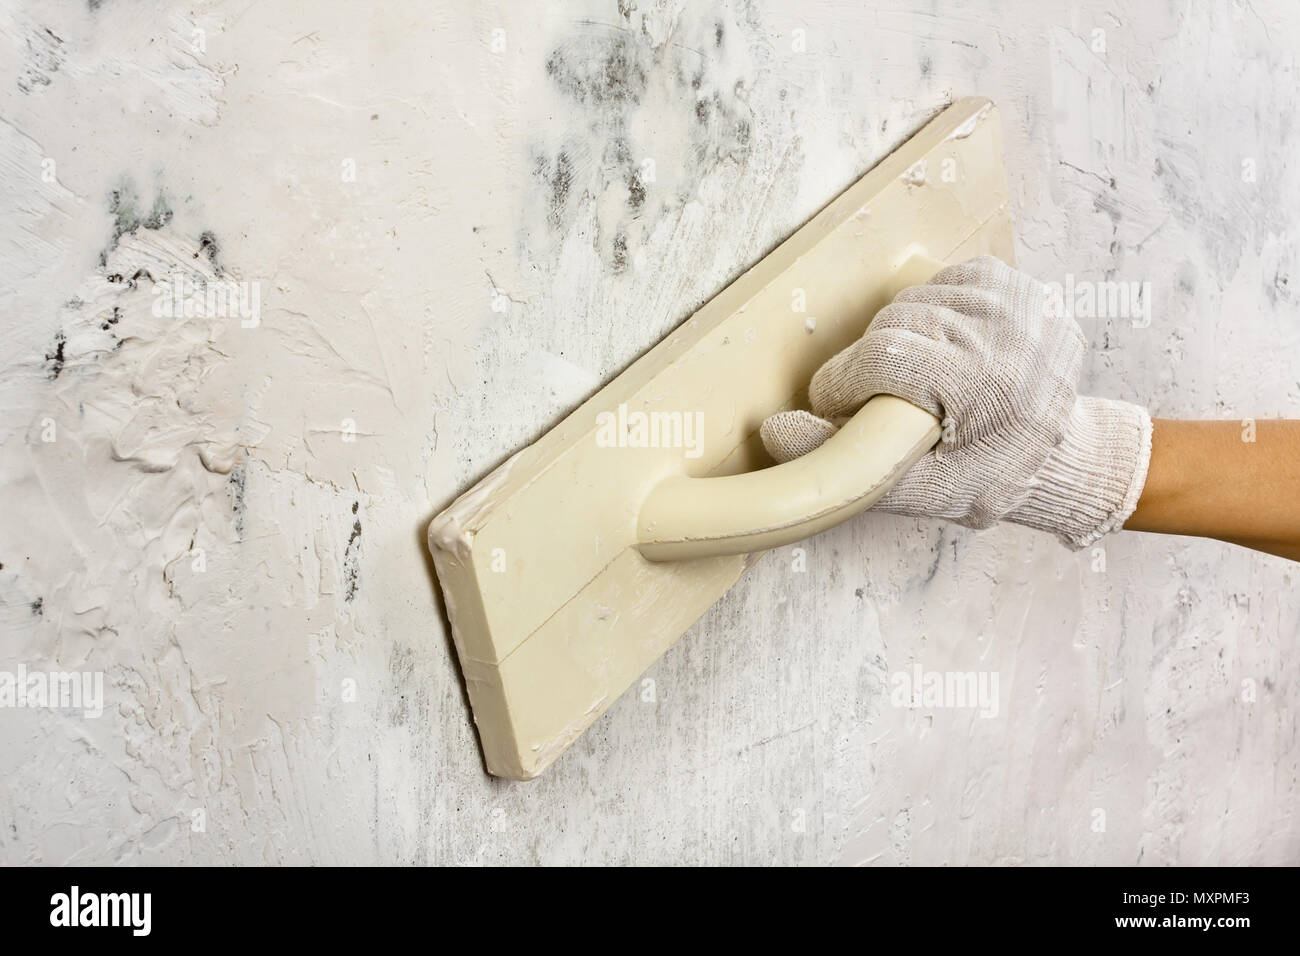 hand with trowel plastering and smoothing concrete wall during repair Stock Photo